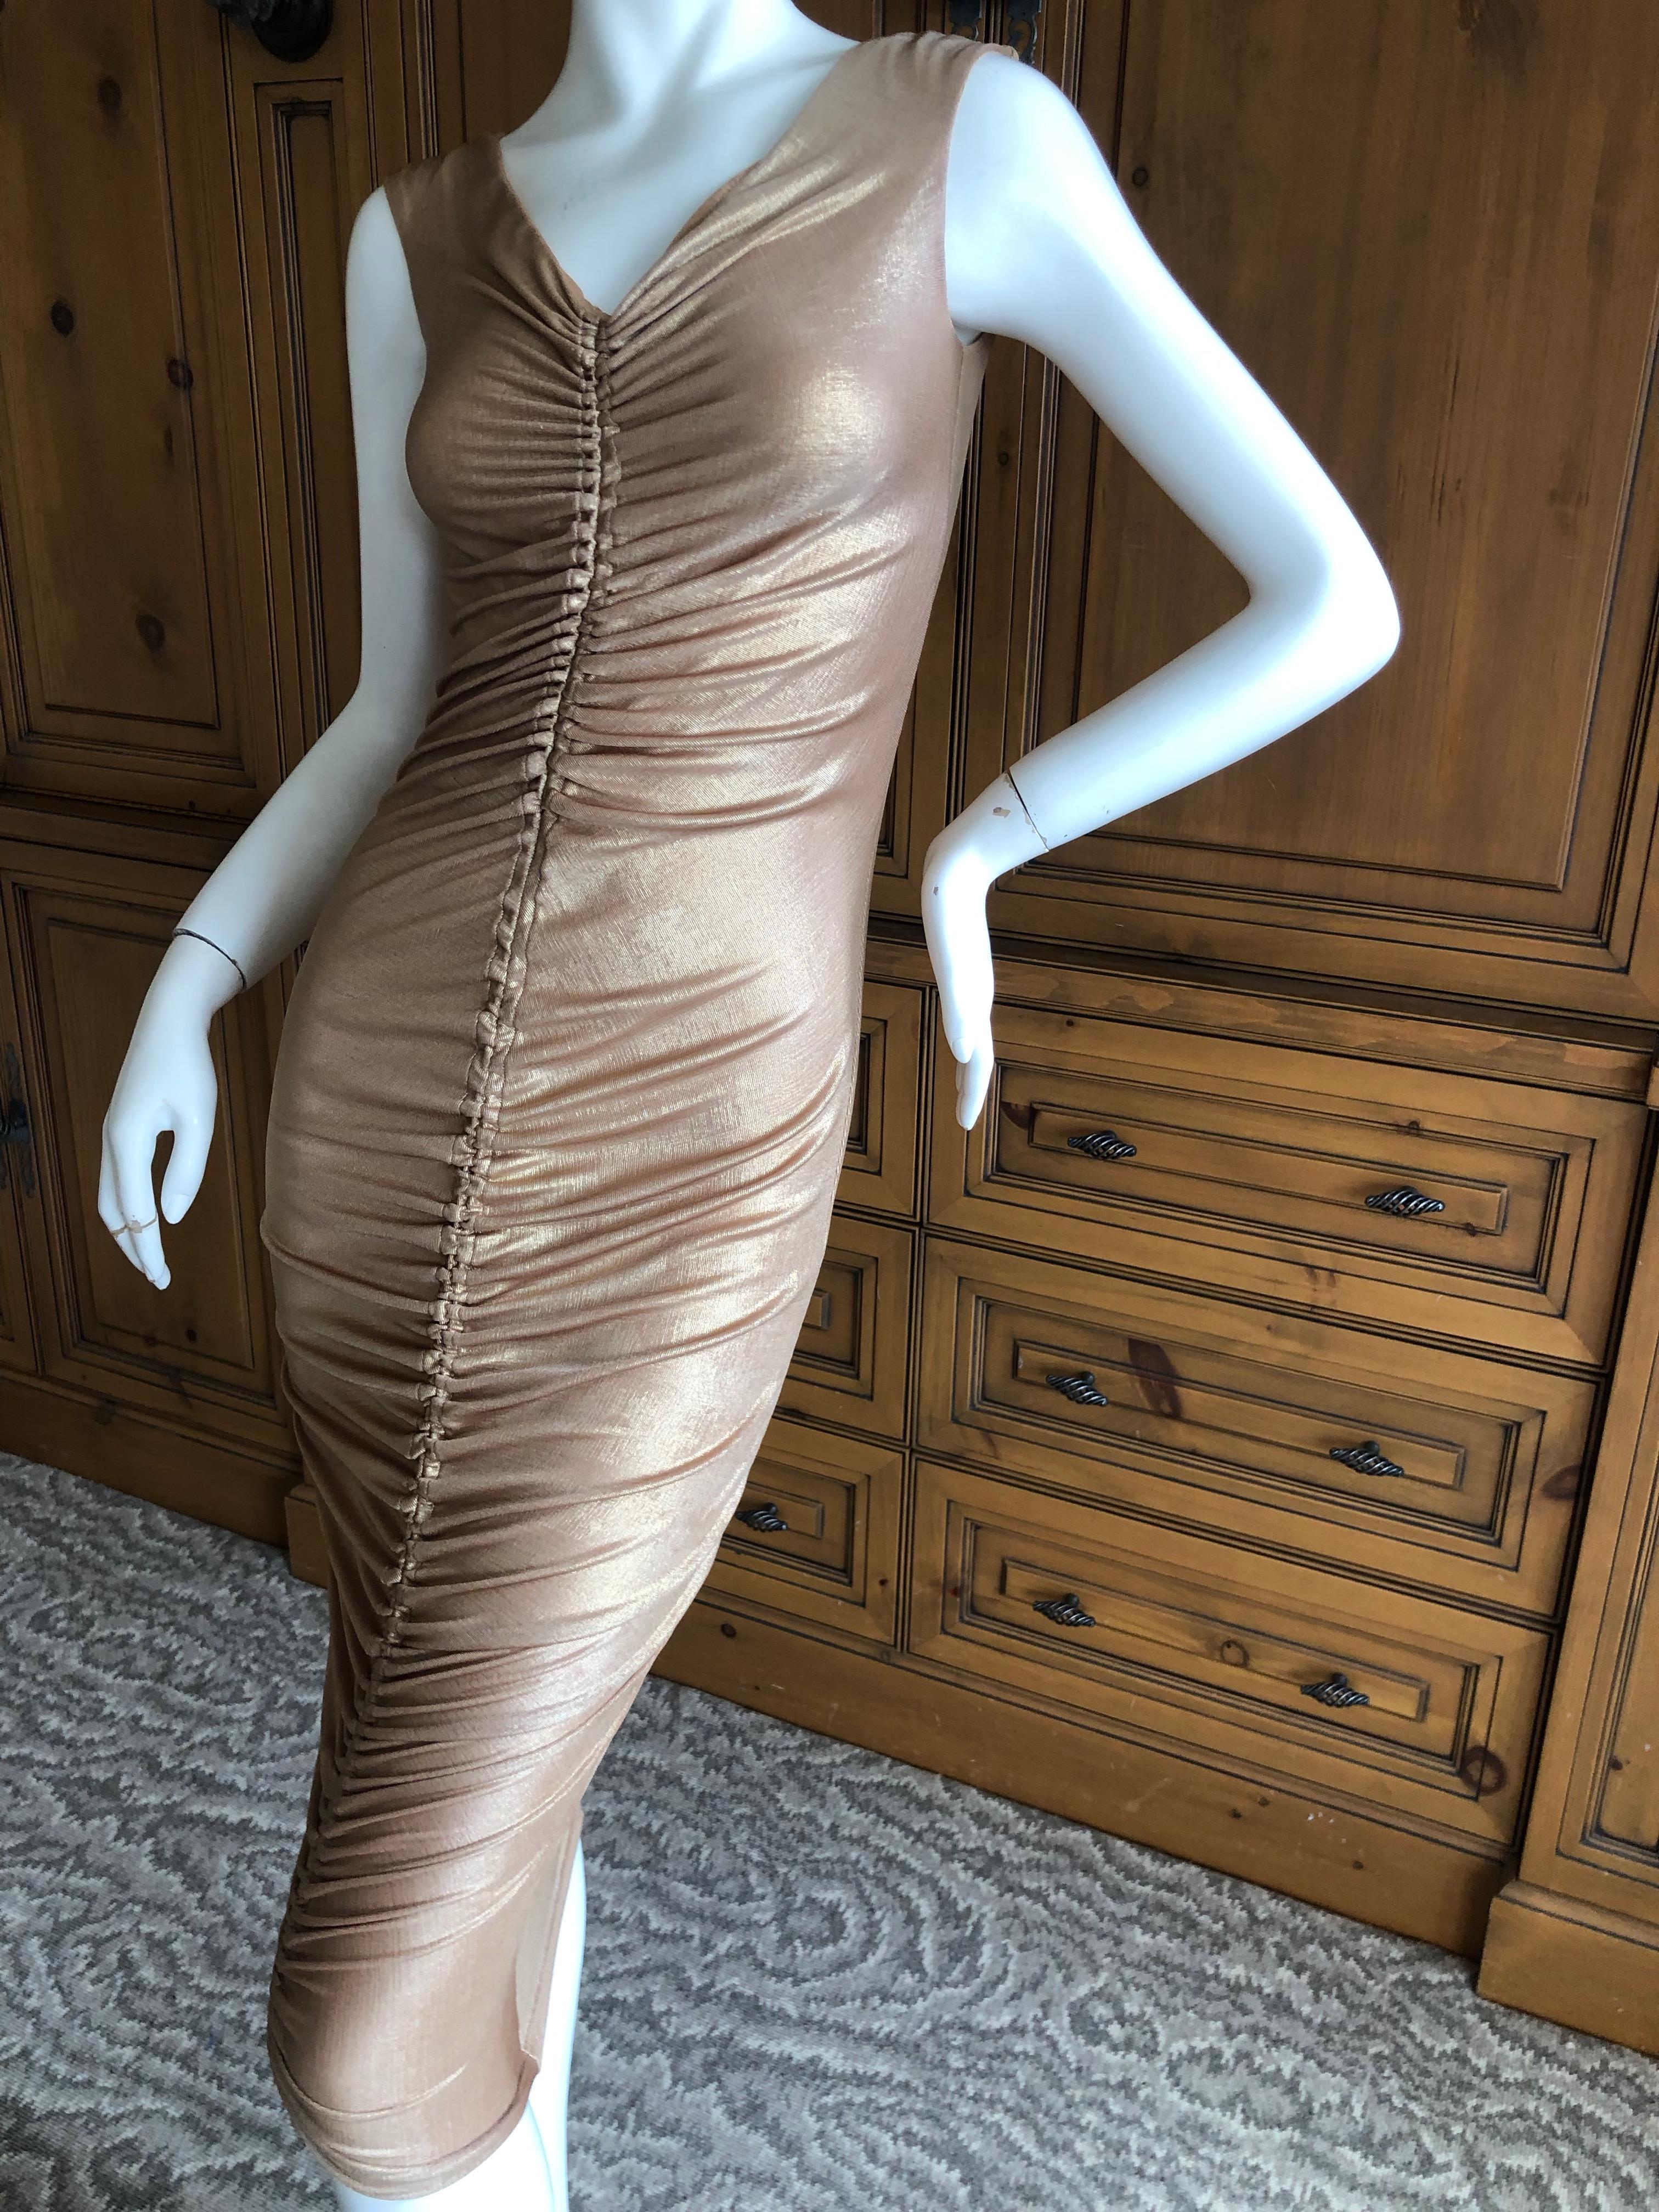 Dolce & Gabbana D&G Vintage Gold Ruched Bodycon Cocktail Dress
  There is  a lot of stretch.
Size 40
Bust 32